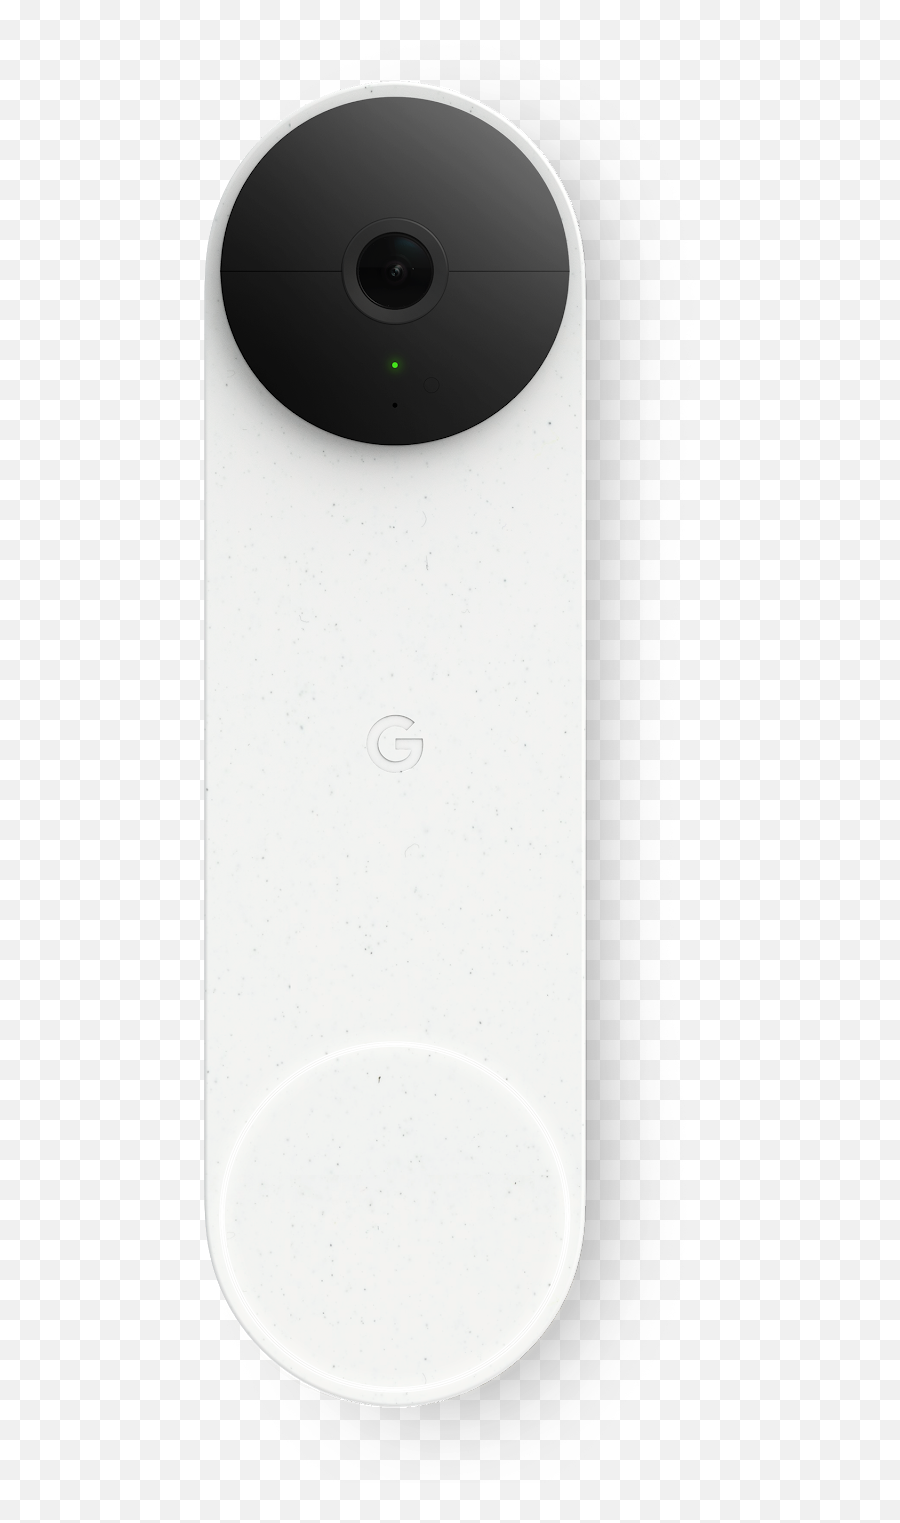 Troubleshoot Low Battery Issues For Nest Cameras And - Google Nest Doorbell Png,Camera Battery Icon